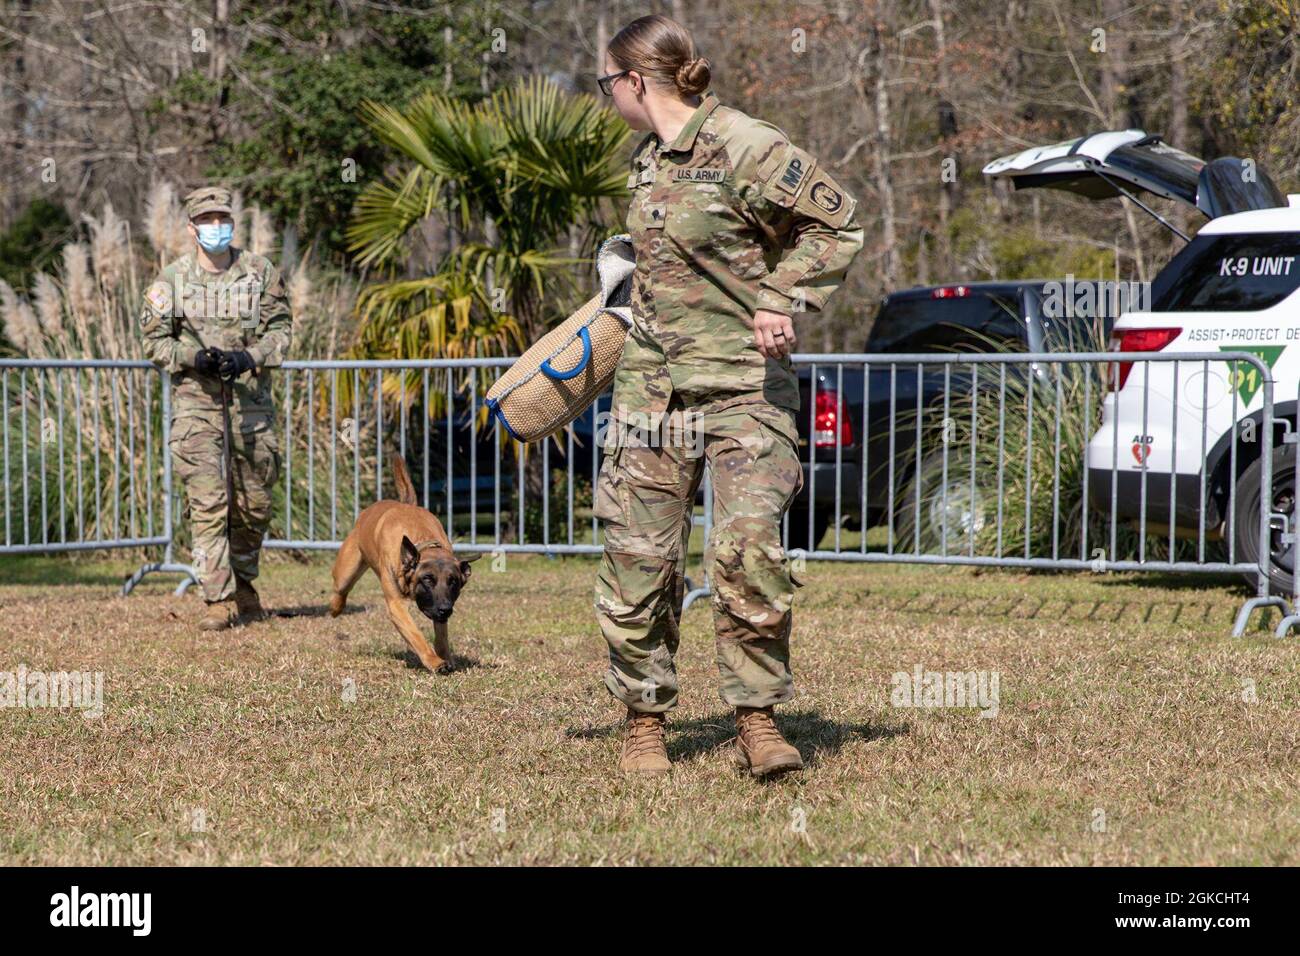 Spc. Catalino Lopez, left, Military Working Dog Alex and Spc. Kaylie Buck, all assigned to 93rd Military Working Dogs Detachment, 385th Military Police Battalion, participate in a MWD demonstration, March 13, 2021, at Holbrook Pond in Fort Stewart, Georgia. The 93rd MWD Det. supports the U.S. Forces Command and U.S. Secret Service missions by performing specialized security patrols and detecting explosives and narcotics. Stock Photo